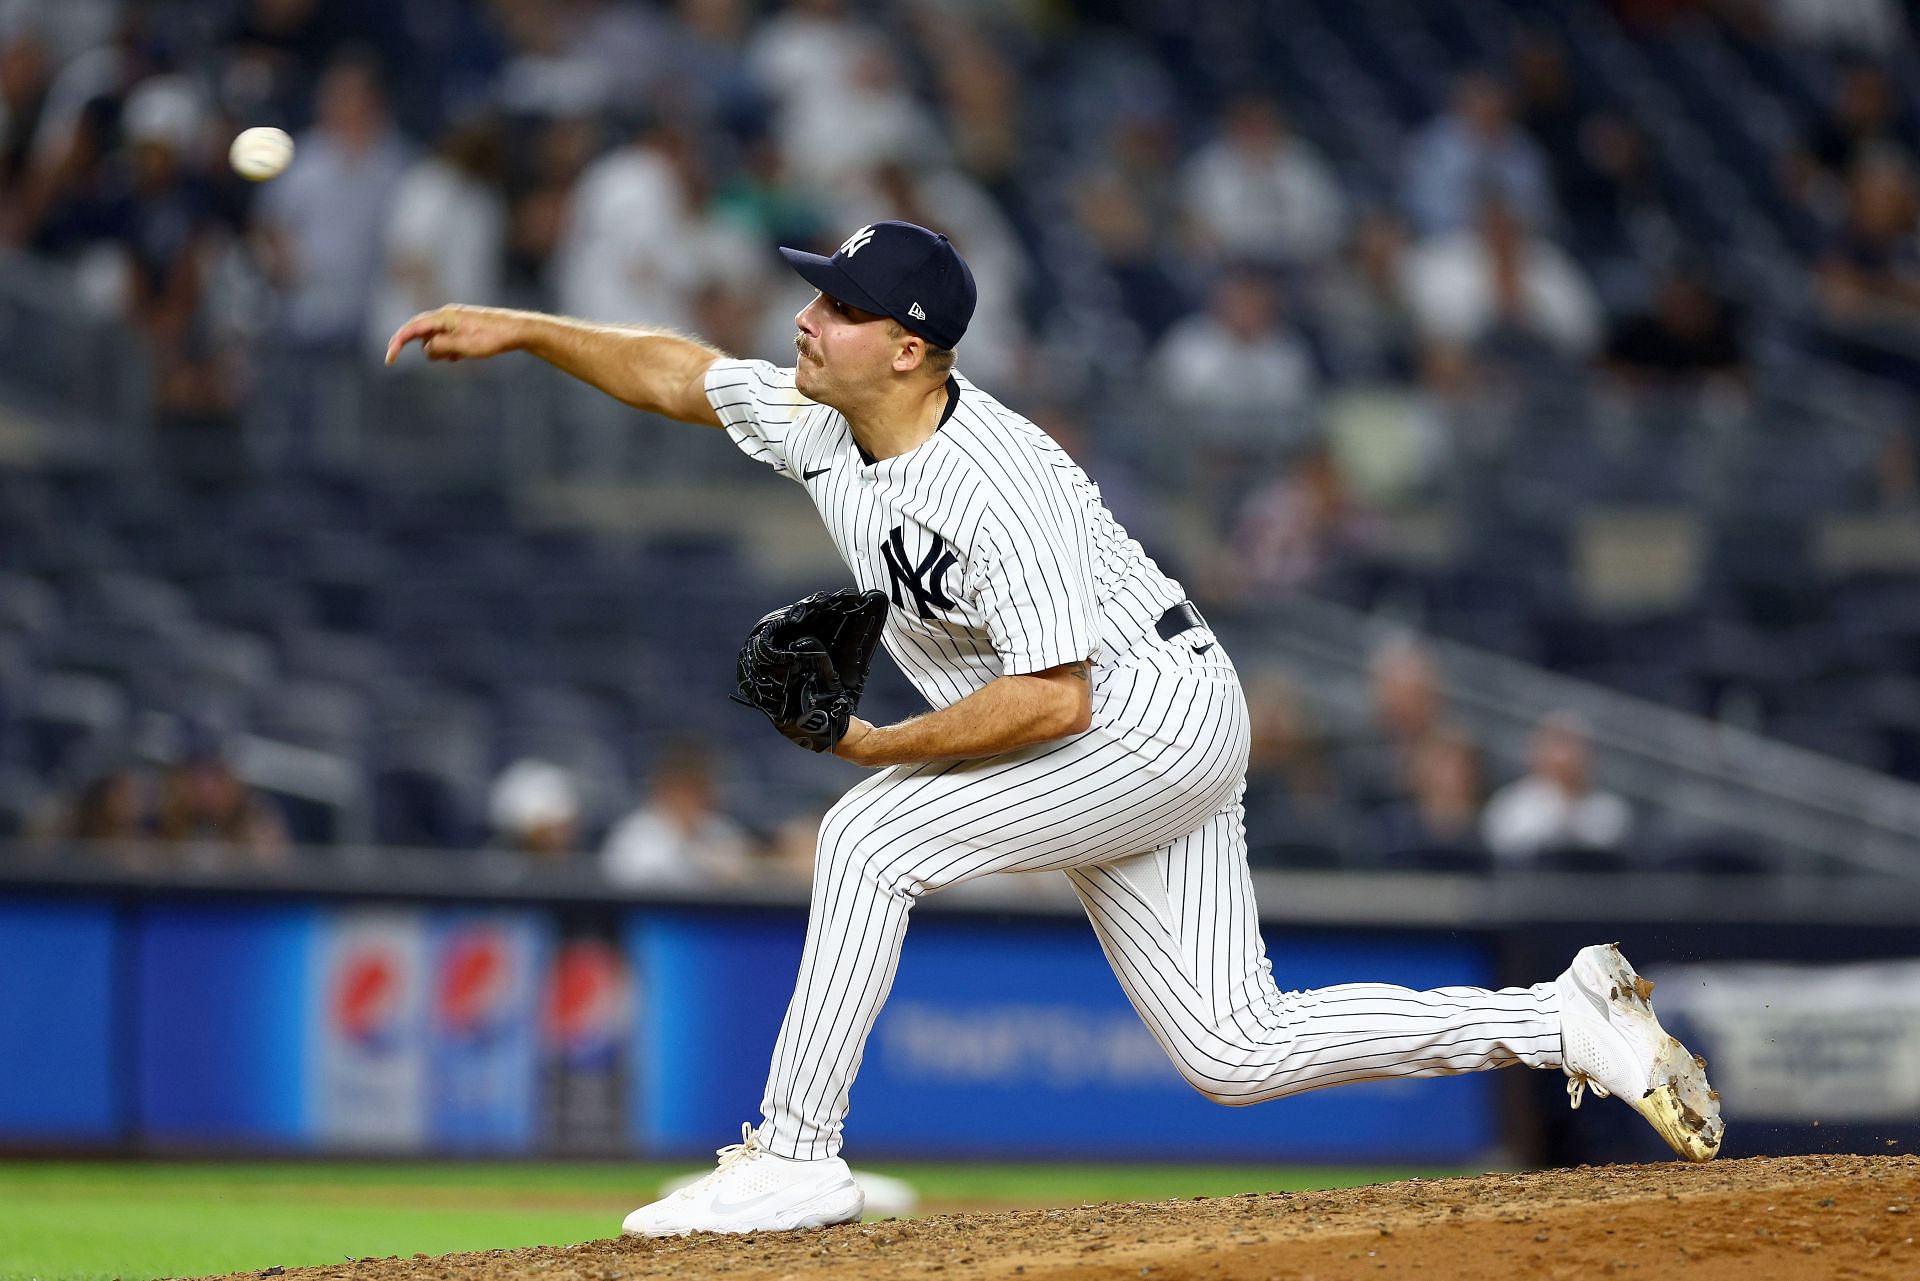 Yankees fans yankees gear near me shouldn't worry about rookie Greg  Weissert's numbers